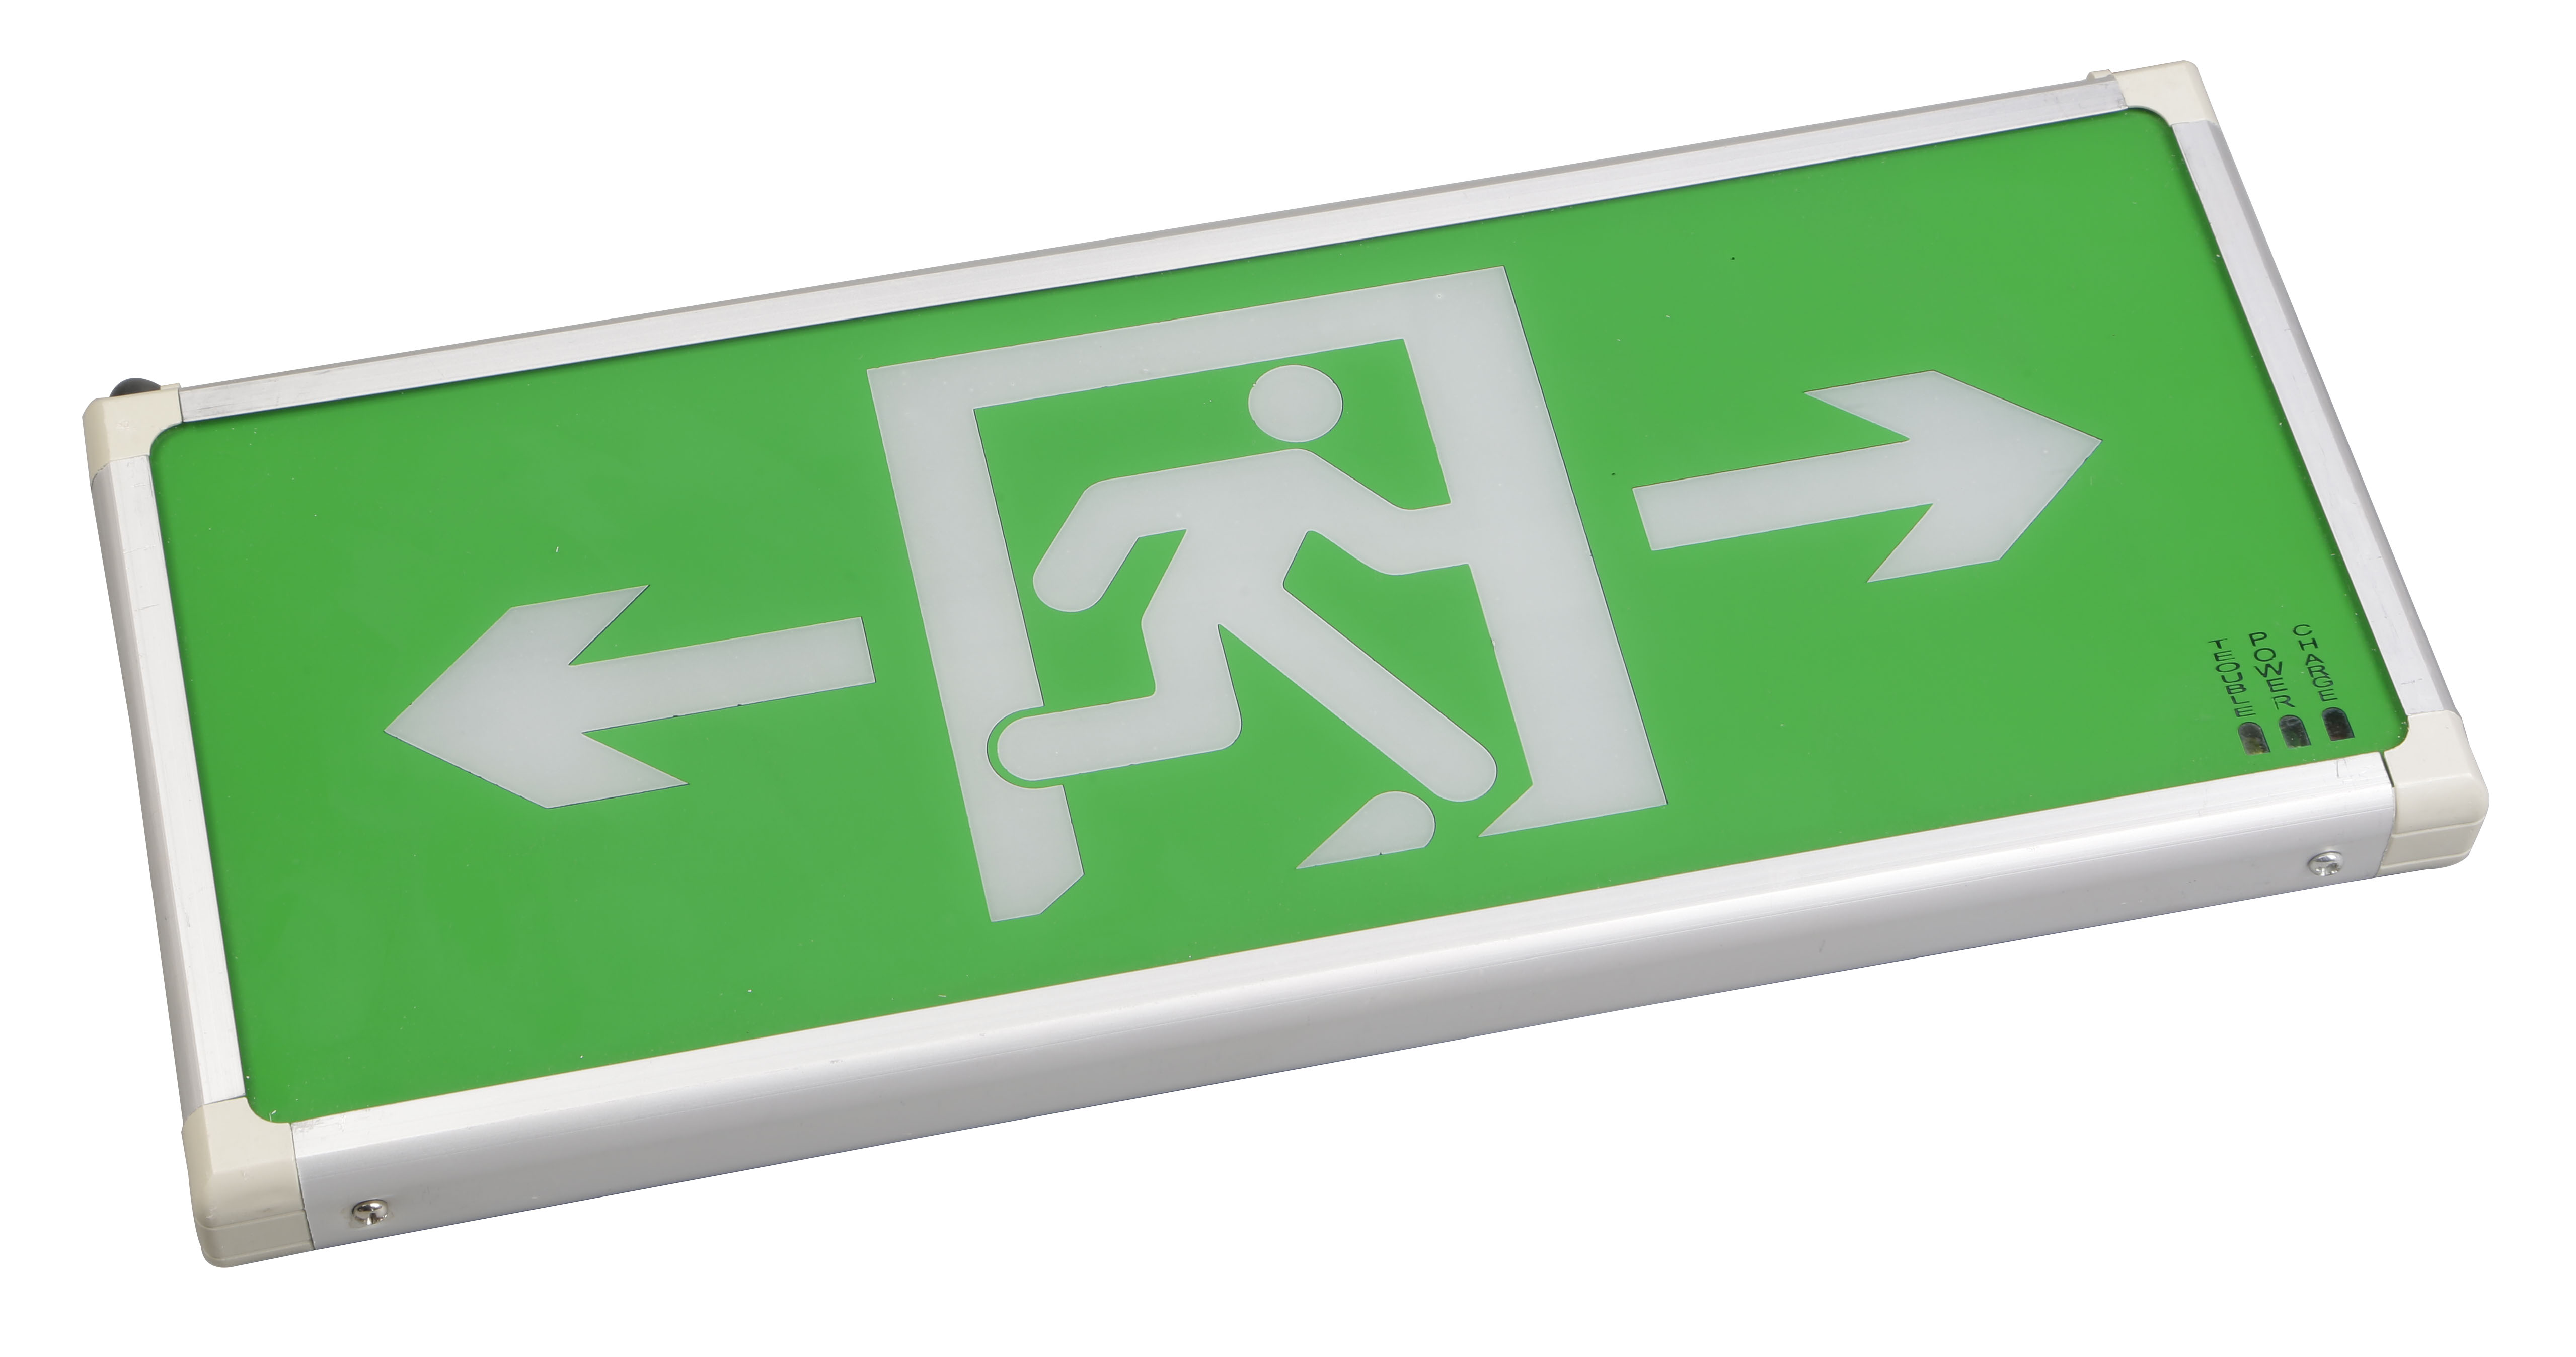 The manufacturer directly supplies Emergency EXIT indicator light